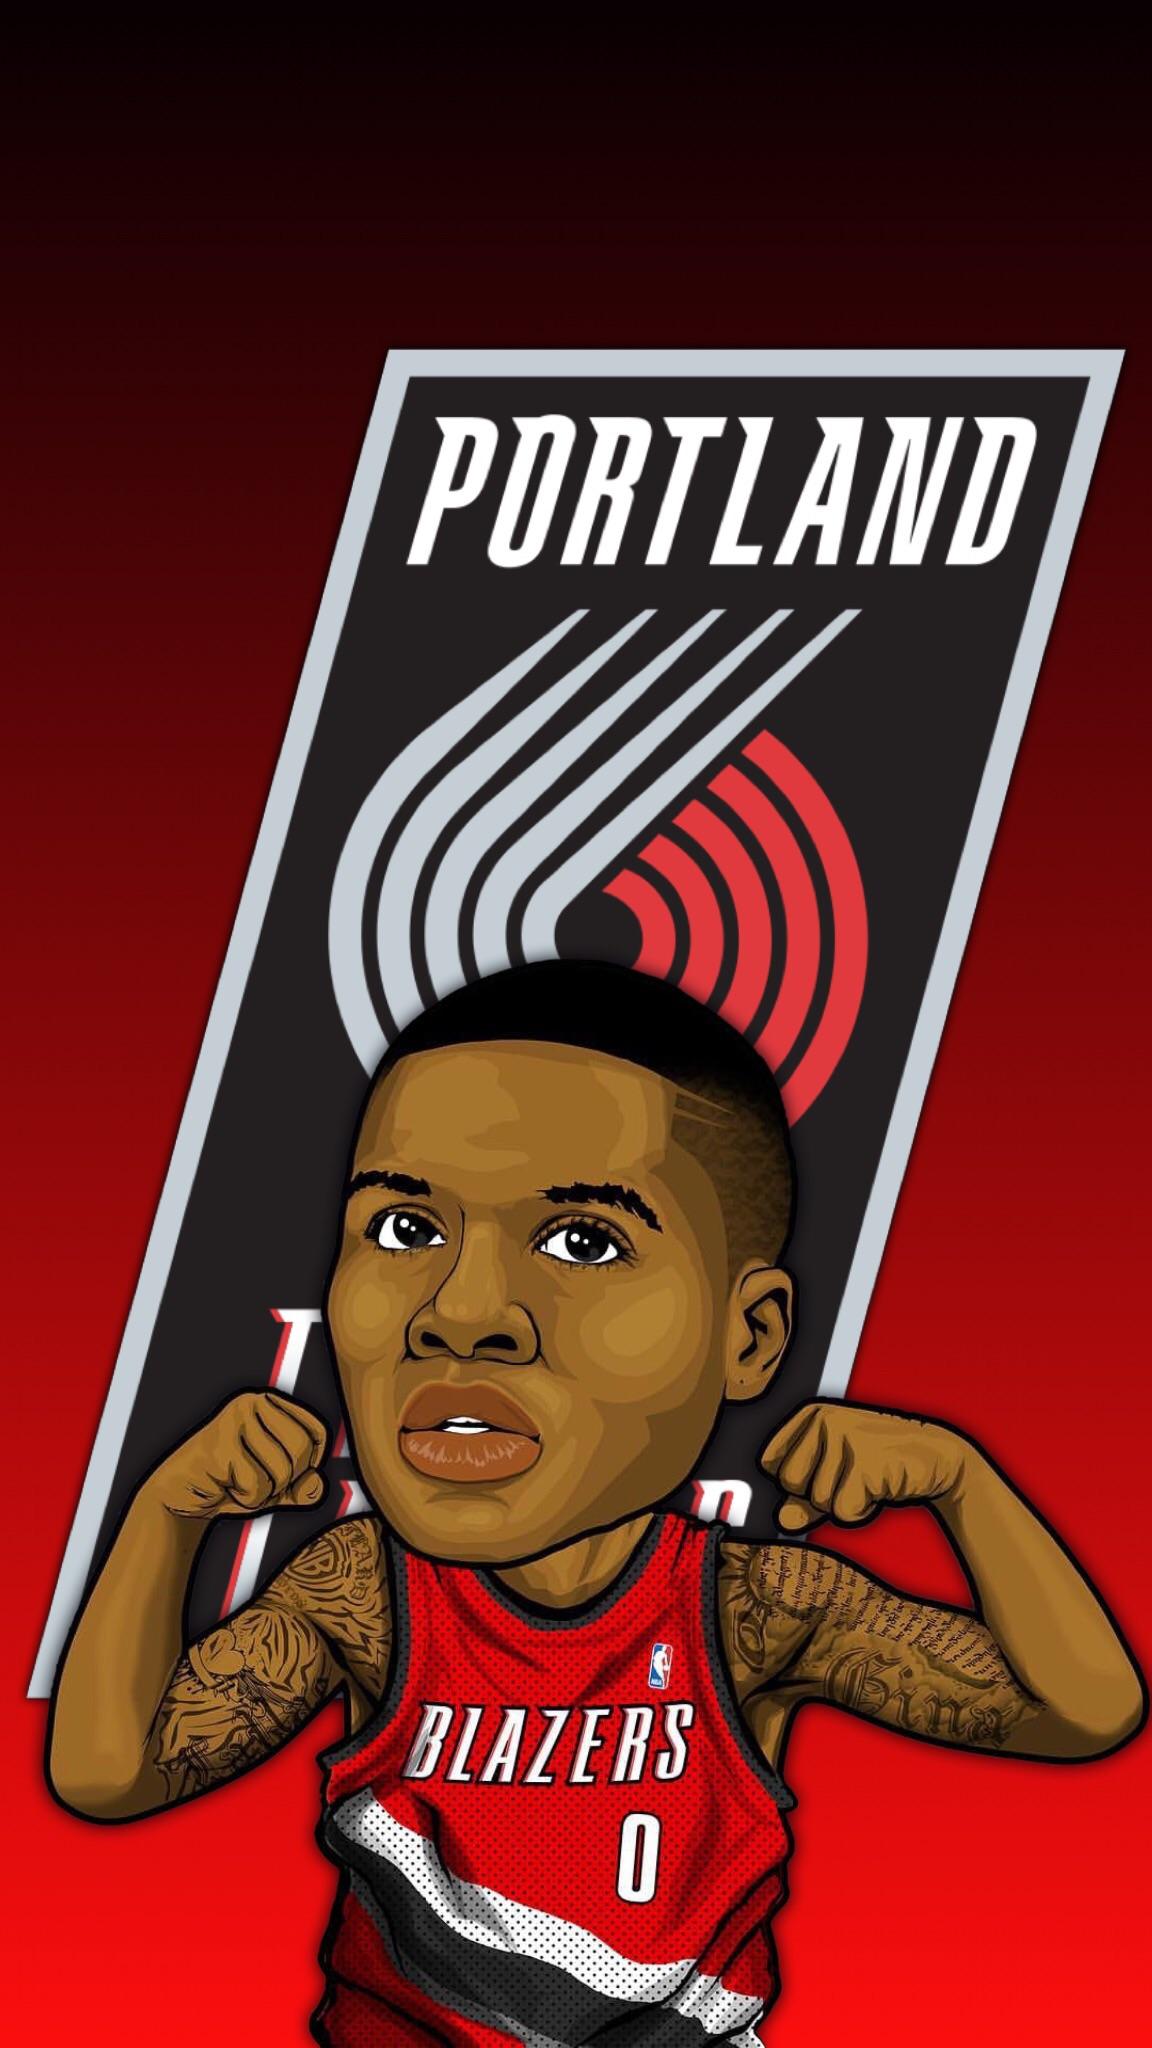 Made a wallpaper of Dame Dolla!